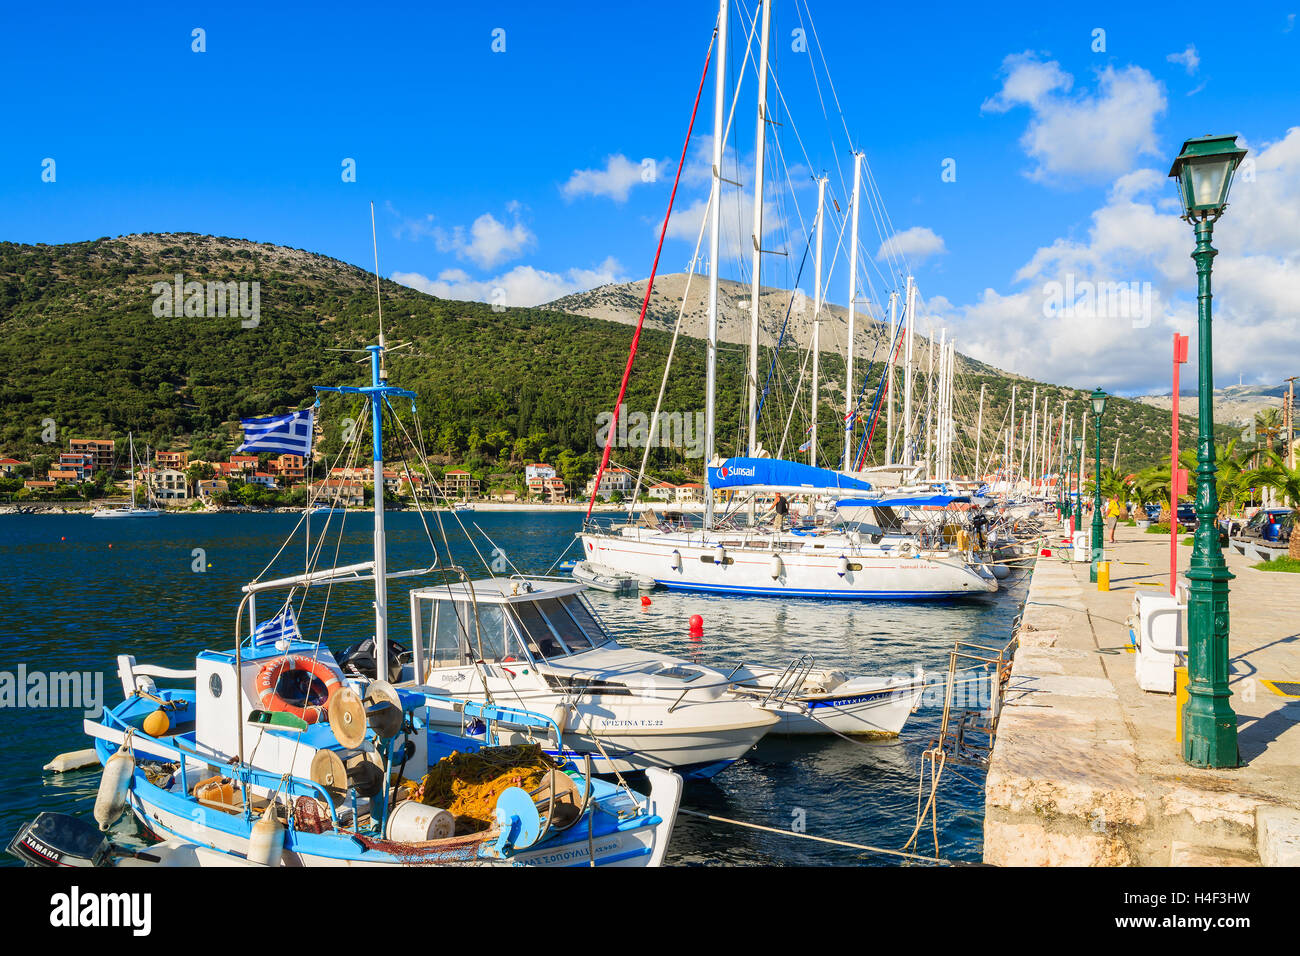 AGIA EFIMIA PORT, KEFALONIA ISLAND - SEP 16, 2014: fishing boats and yachts mooring in Greek port of Agia Efimia on coast of Kefalonia island. Yachting is a popular holiday activity on Greeks islands. Stock Photo